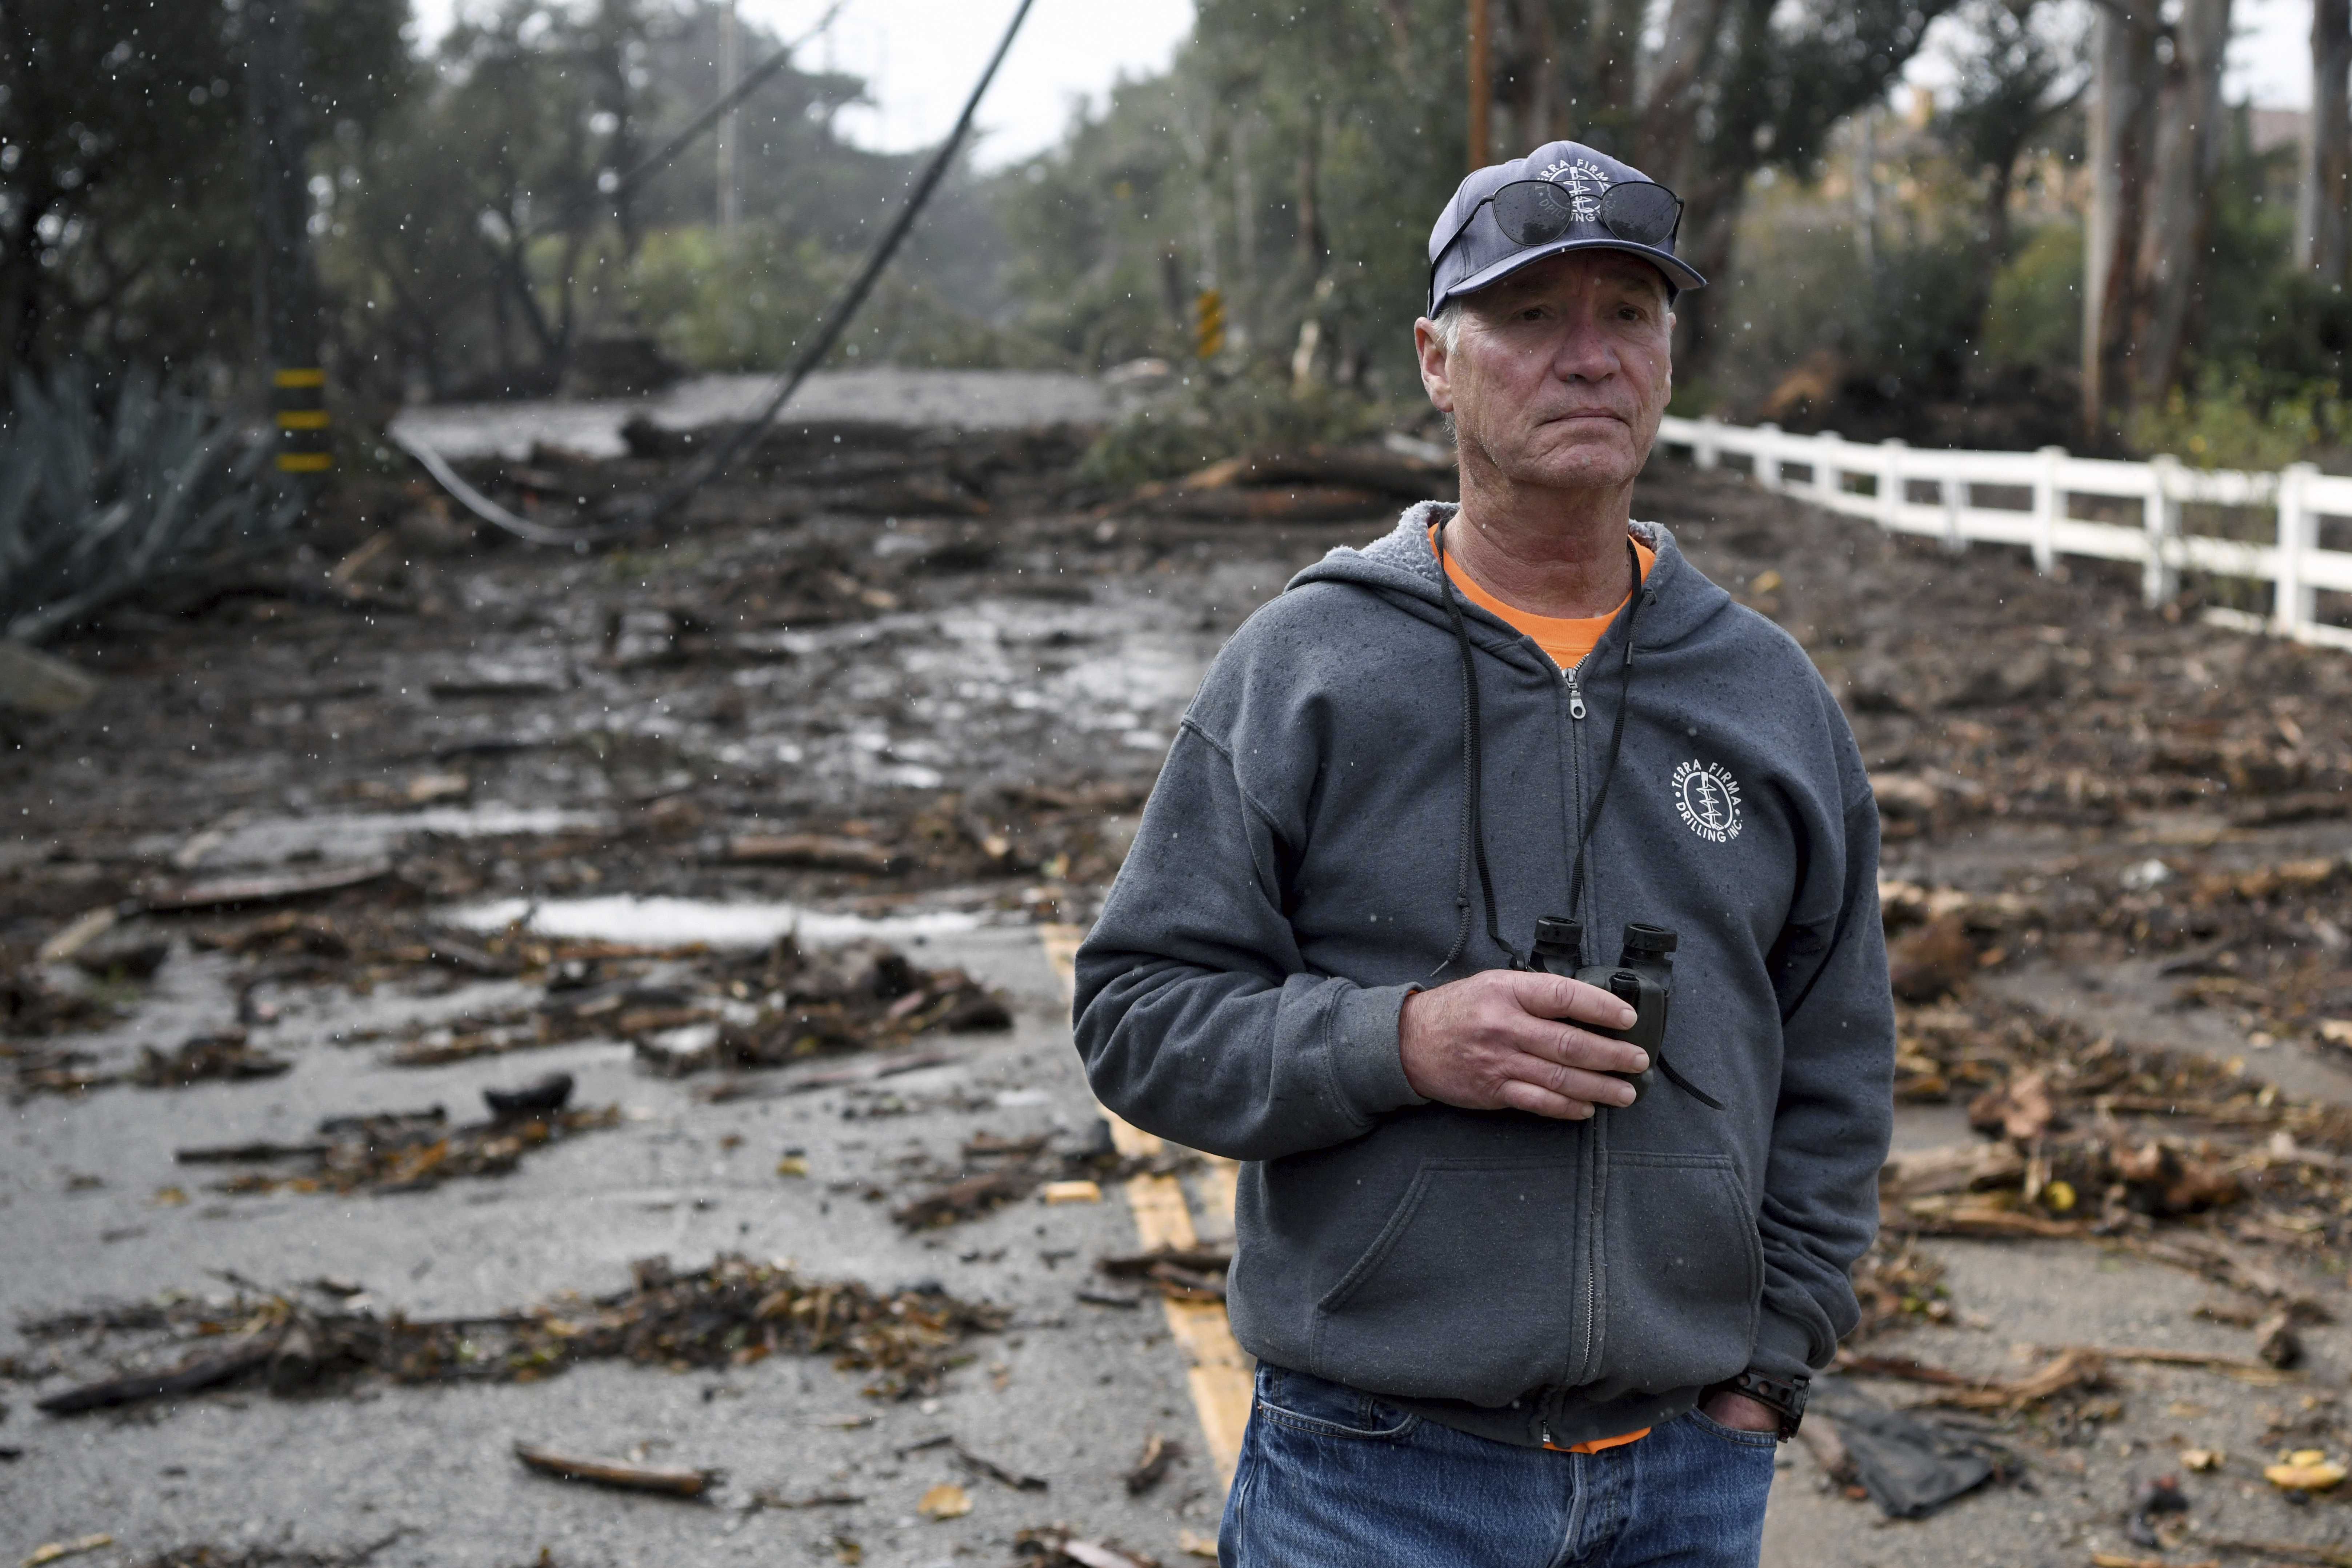 Montecito resident Donald Crouse surveys the damage on East Valley Road in Montecito, Calif., where utility lines fell onto a bridge during the rain storm, Tuesday, Jan. 9, 2018. (AP Photo/Michael Owen Baker)